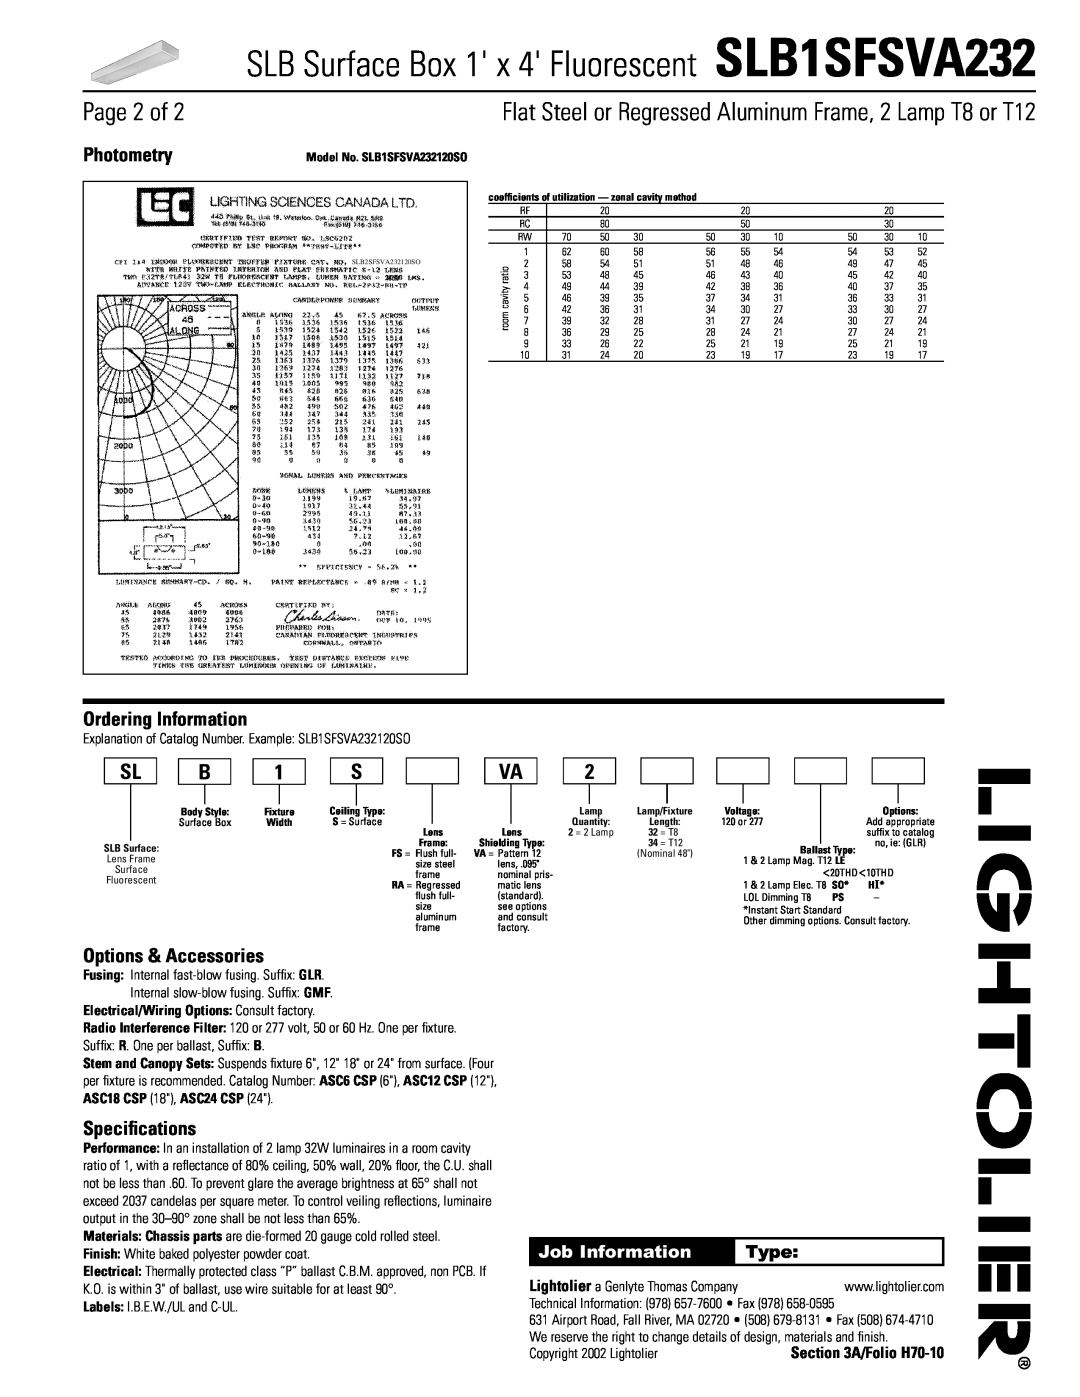 Lightolier SLB1SFSVA232 Page 2 of, Photometry, Ordering Information, Options & Accessories, Speciﬁcations, Job Information 